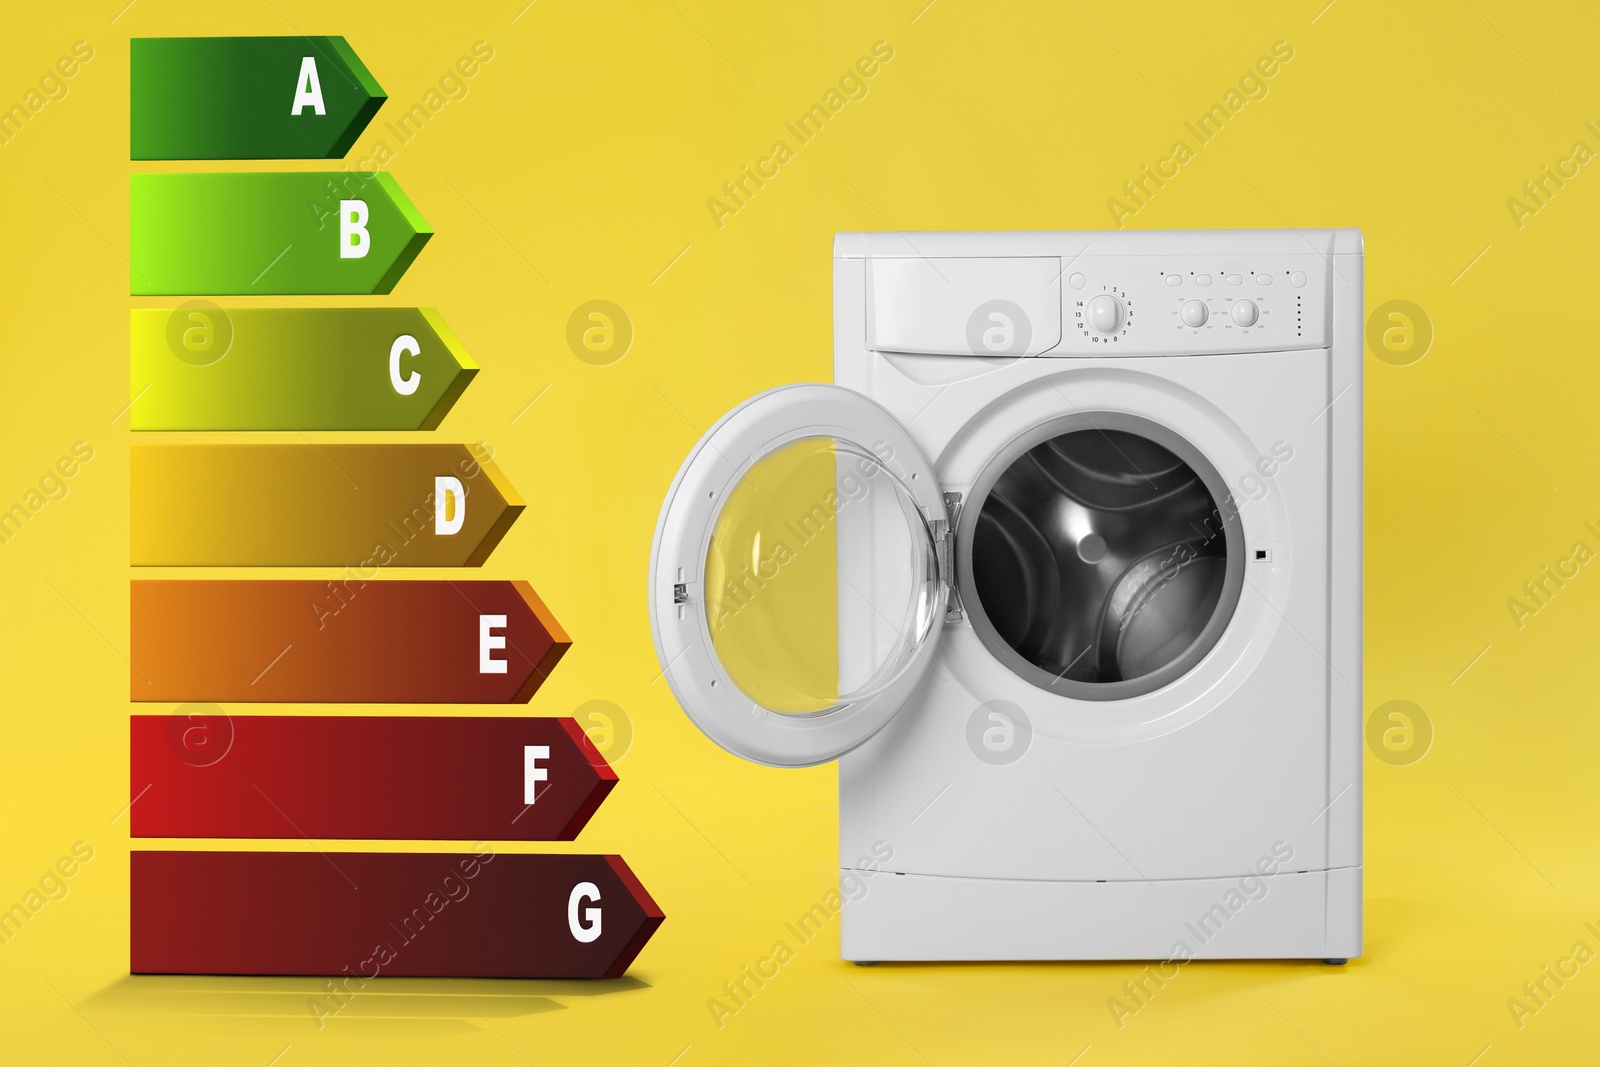 Image of Energy efficiency rating label and washing machine on yellow background